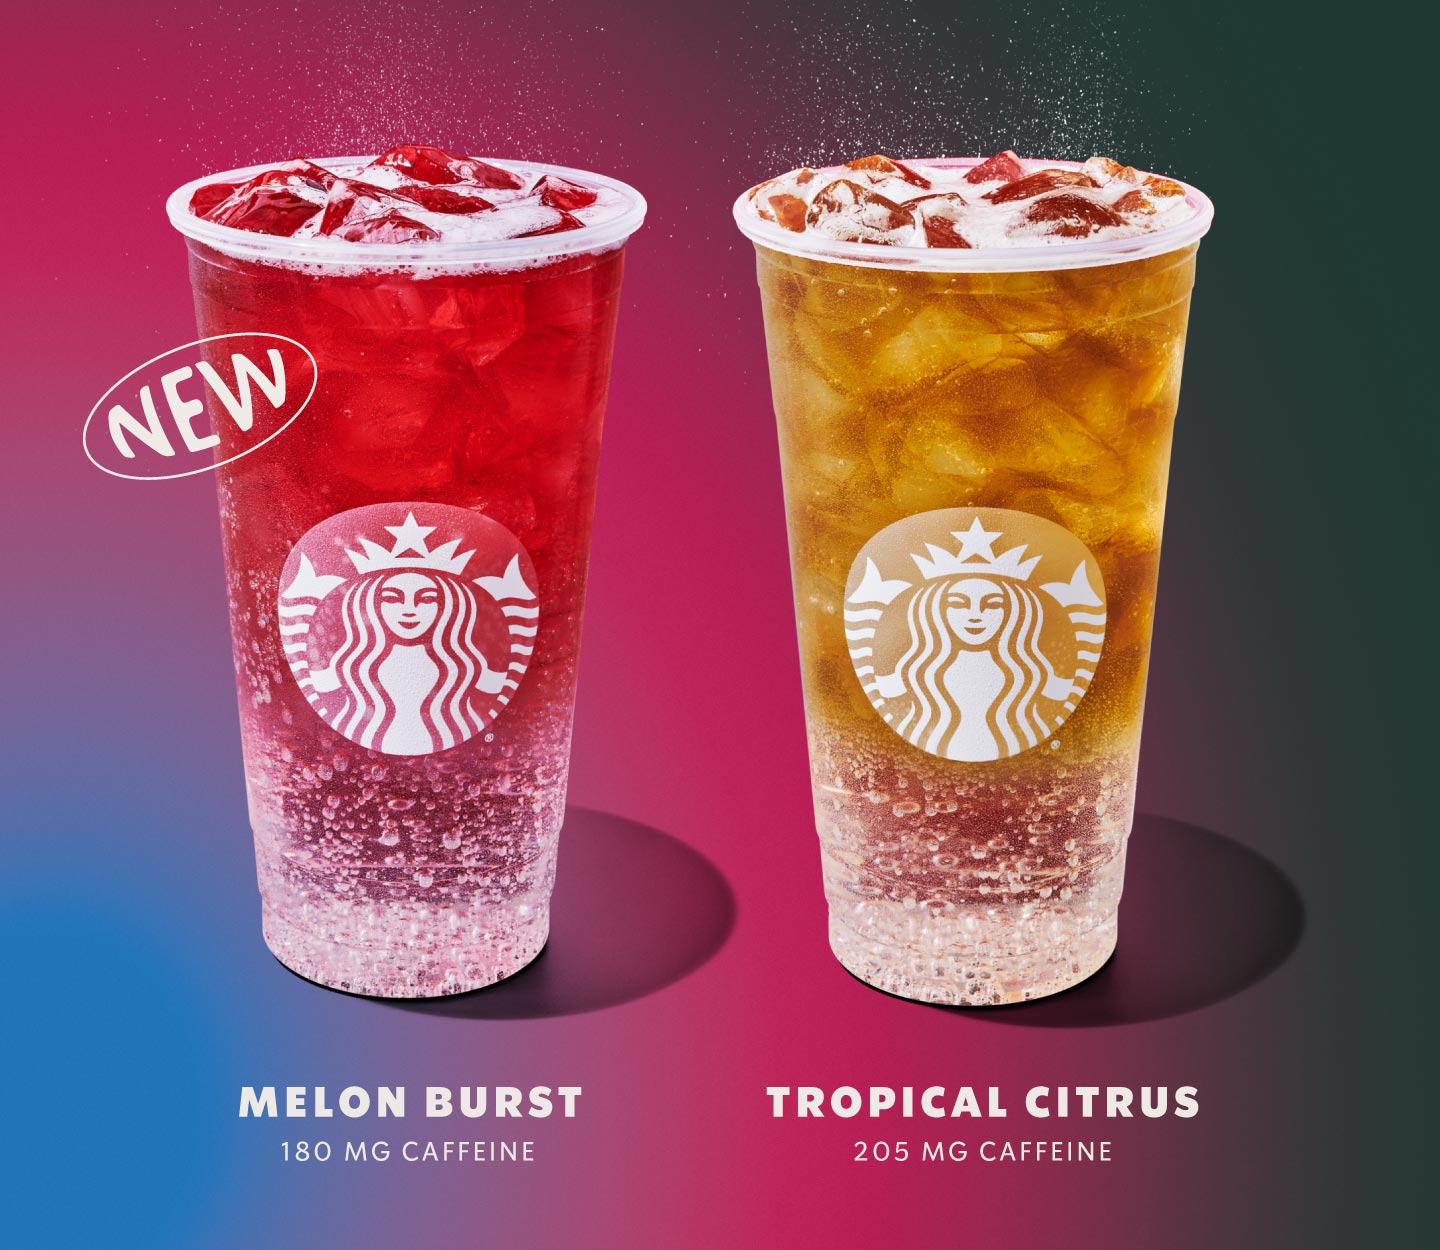 Two venti iced drinks on a gradient background, with a text bubble that says NEW. The caffeine content is listed under each drink—180 mg for Melon Burst and 205 mg for Tropical Citrus.